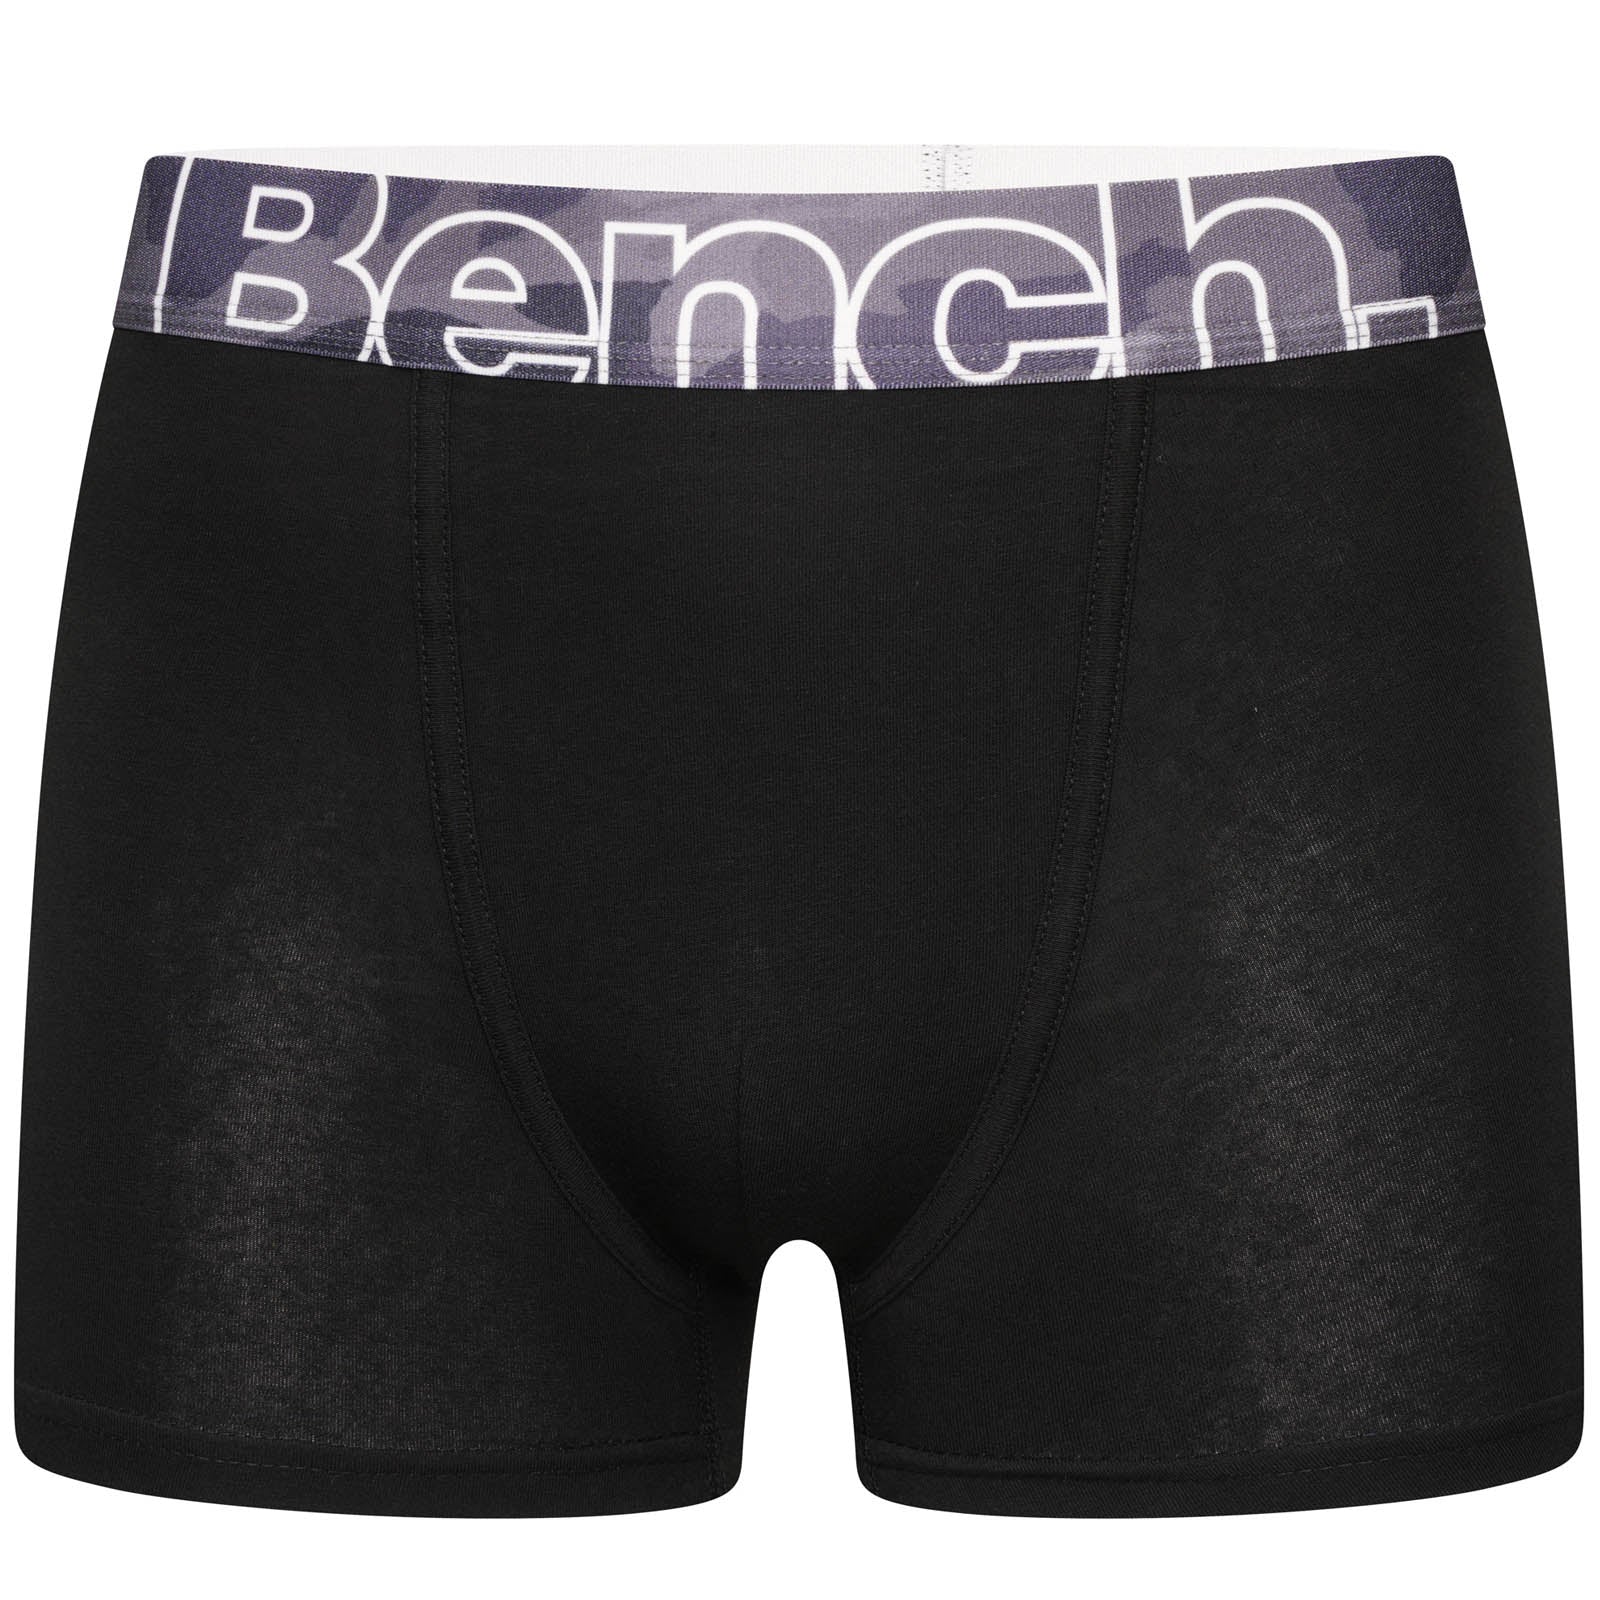 Bench Mens Conan 3 Pack Elasticated Underwear Boxers Boxer Shorts - Assorted